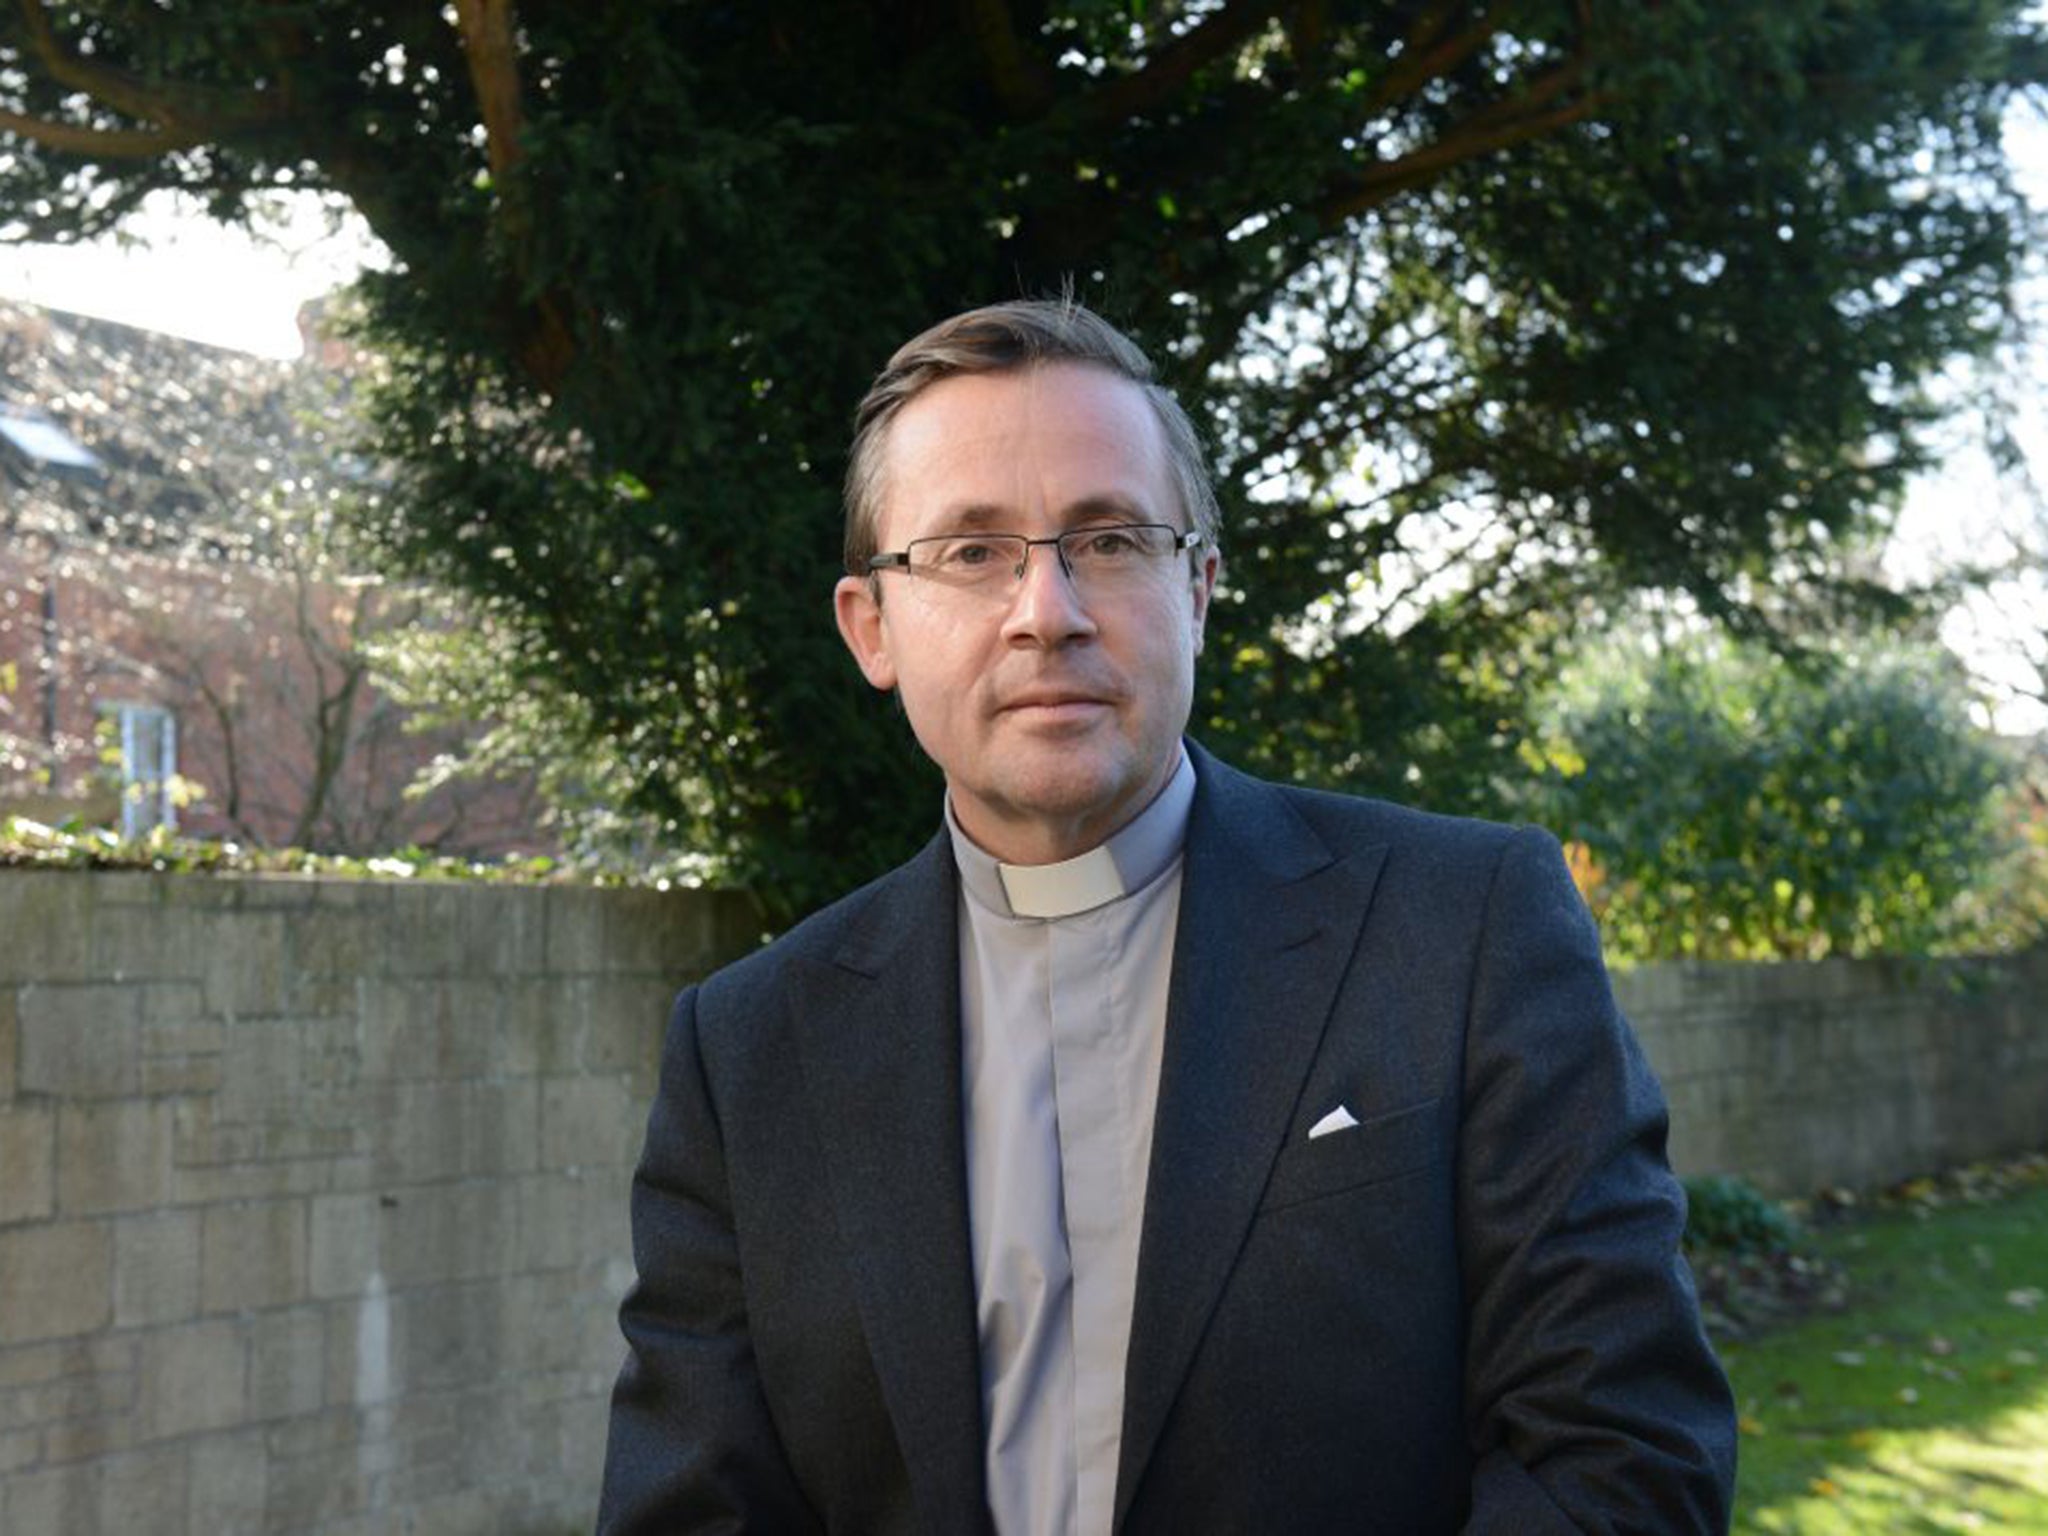 The Rev Nick Mercer joined the priesthood after leaving the Army (Jay Williams)